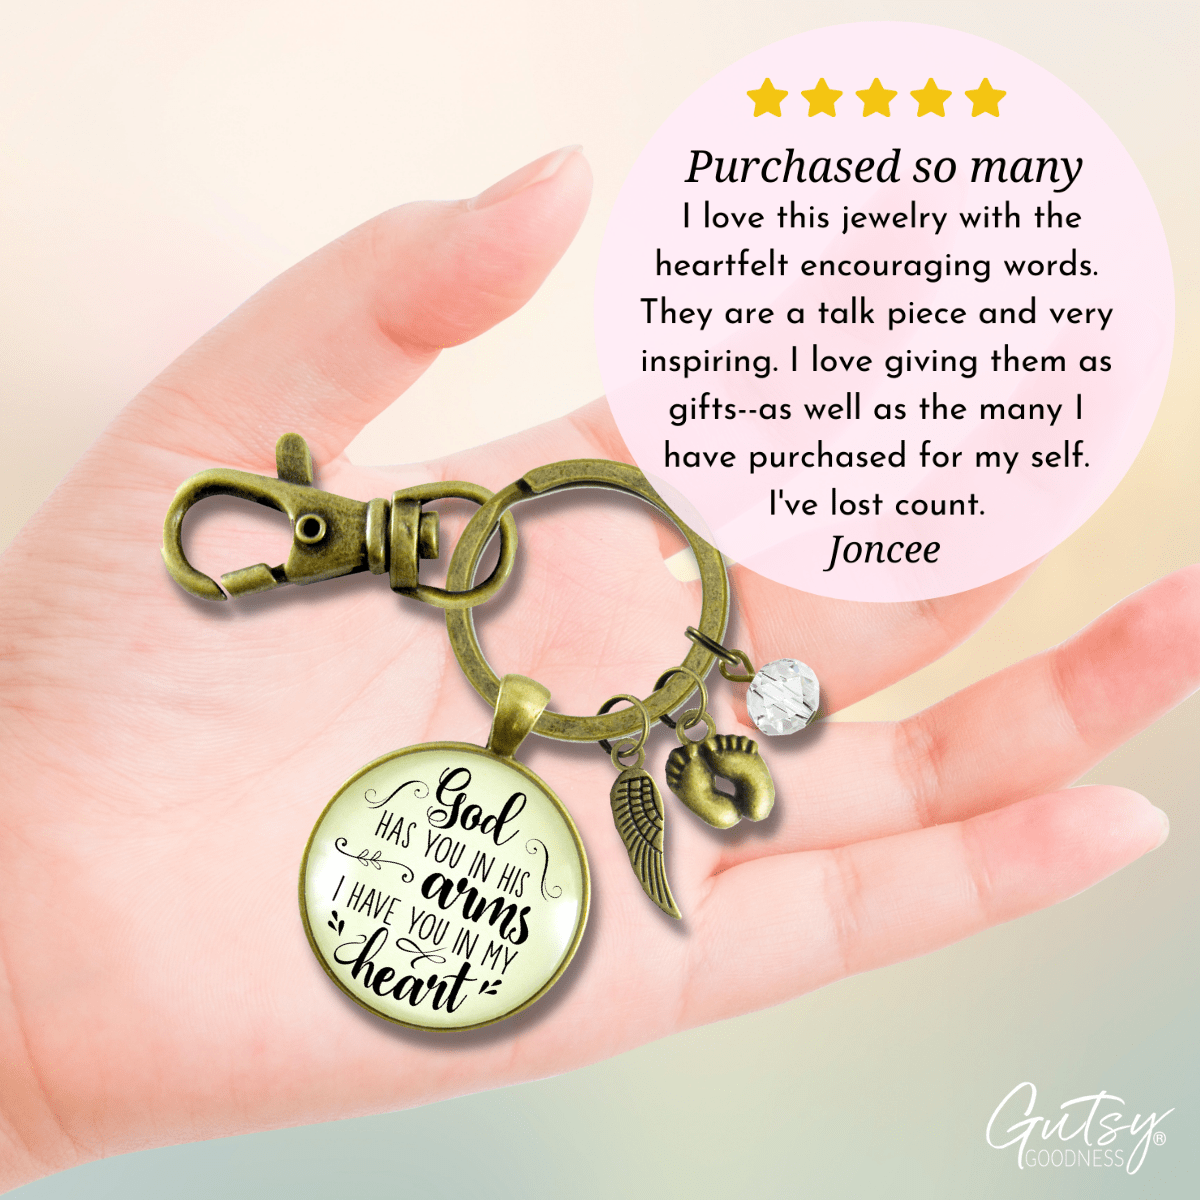 Baby Loss Memorial Set of 2 Keychains For Mom & Dad God Has You In His Arms Heaven Miscarriage - Gutsy Goodness